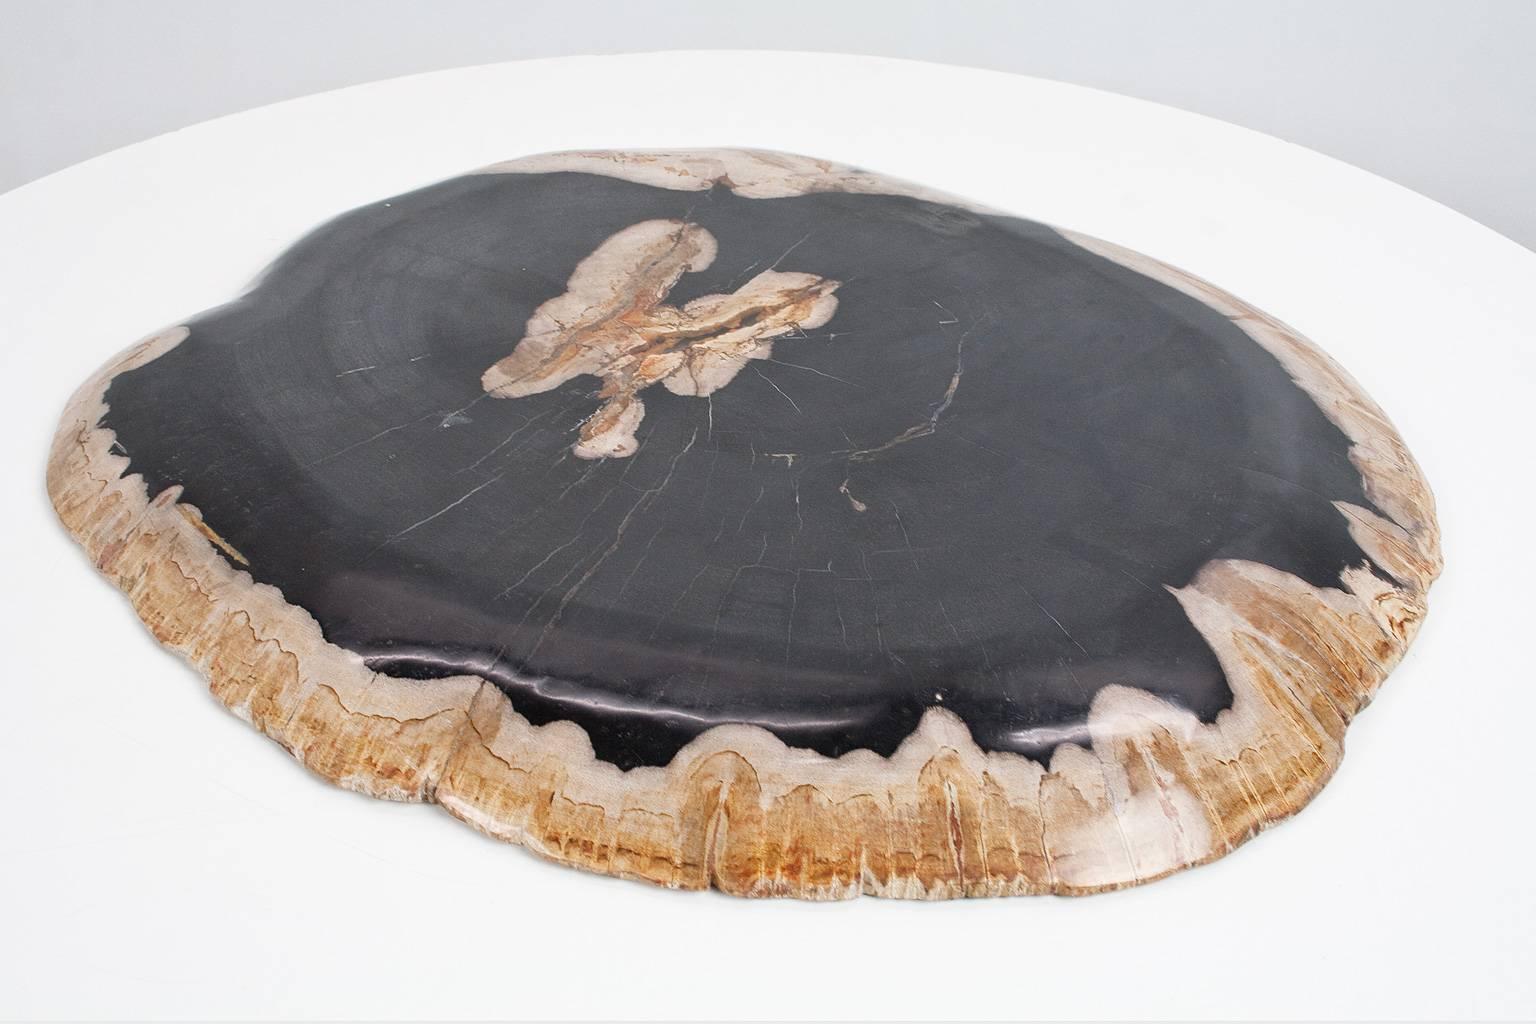 Large petrified wooden plate or platter, beautiful as a home accessory. Smooth sanded an polished. The contrasting charcoal grey and beige tones paired with the scale make this an impressive piece for any space. The object still holds the organic